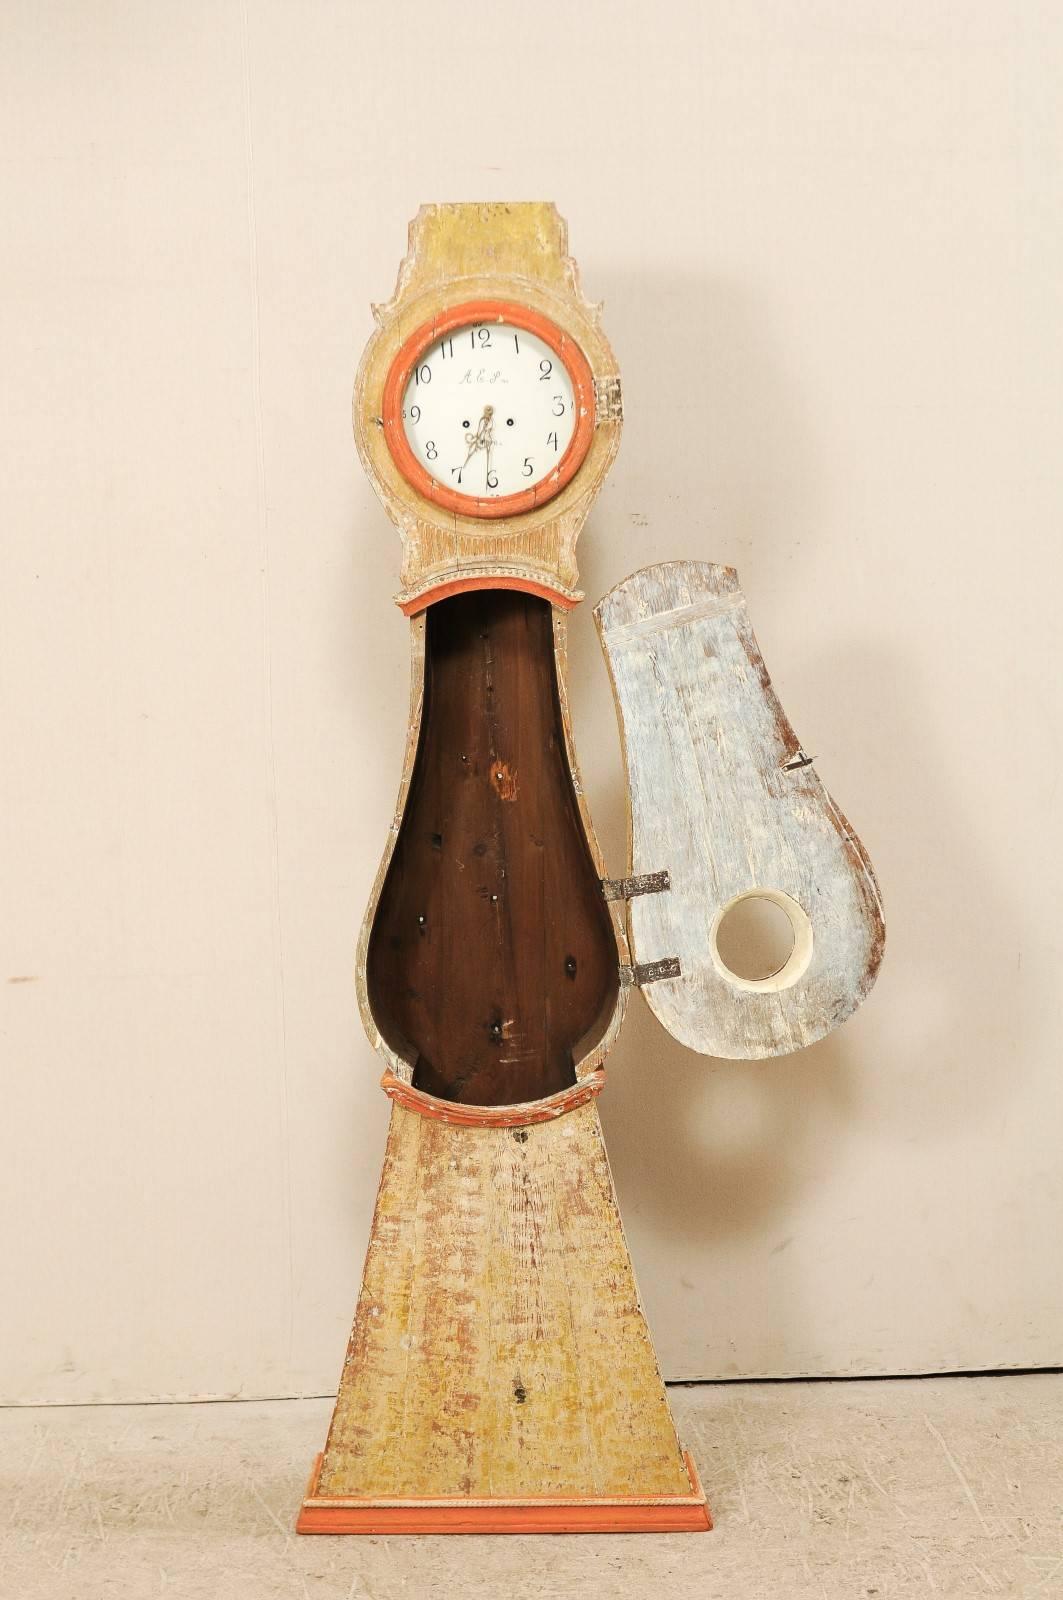 19th Century Painted Wood Swedish Clock with Warm Tangerine Accents 1